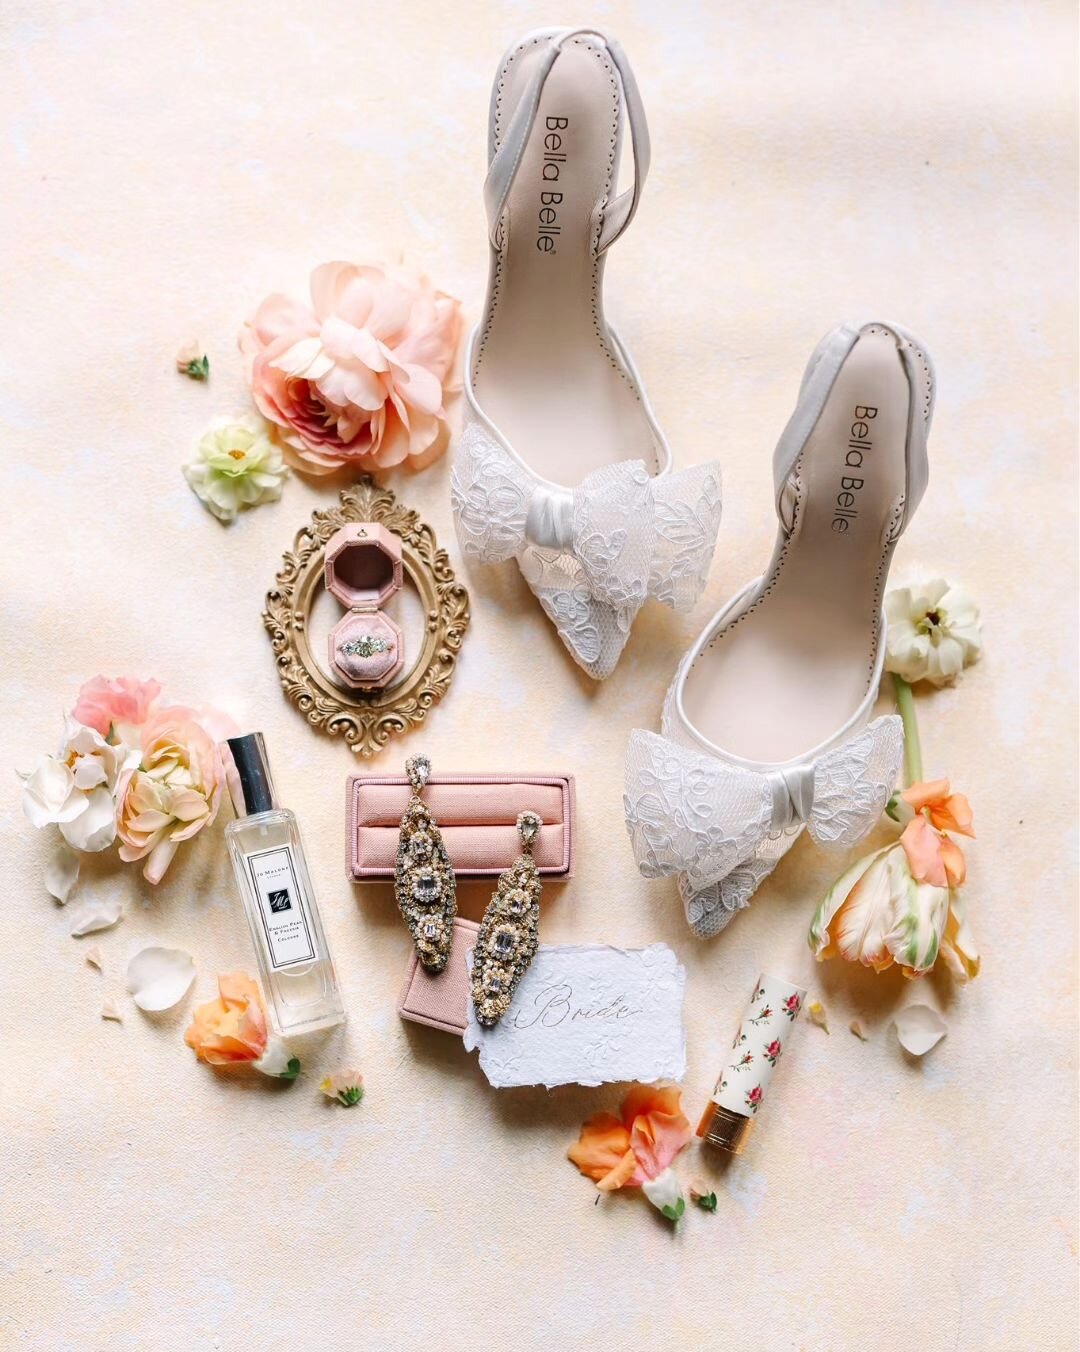 The Fontainebleau Earrings, captured by @hannahwayphoto in this pretty arrangement of bridal details. These ornate wedding earrings are adorned with gilded handmade lace motifs and sparkling vintage crystals. ⁠
⁠
Made in our Vermont, USA, atelier and